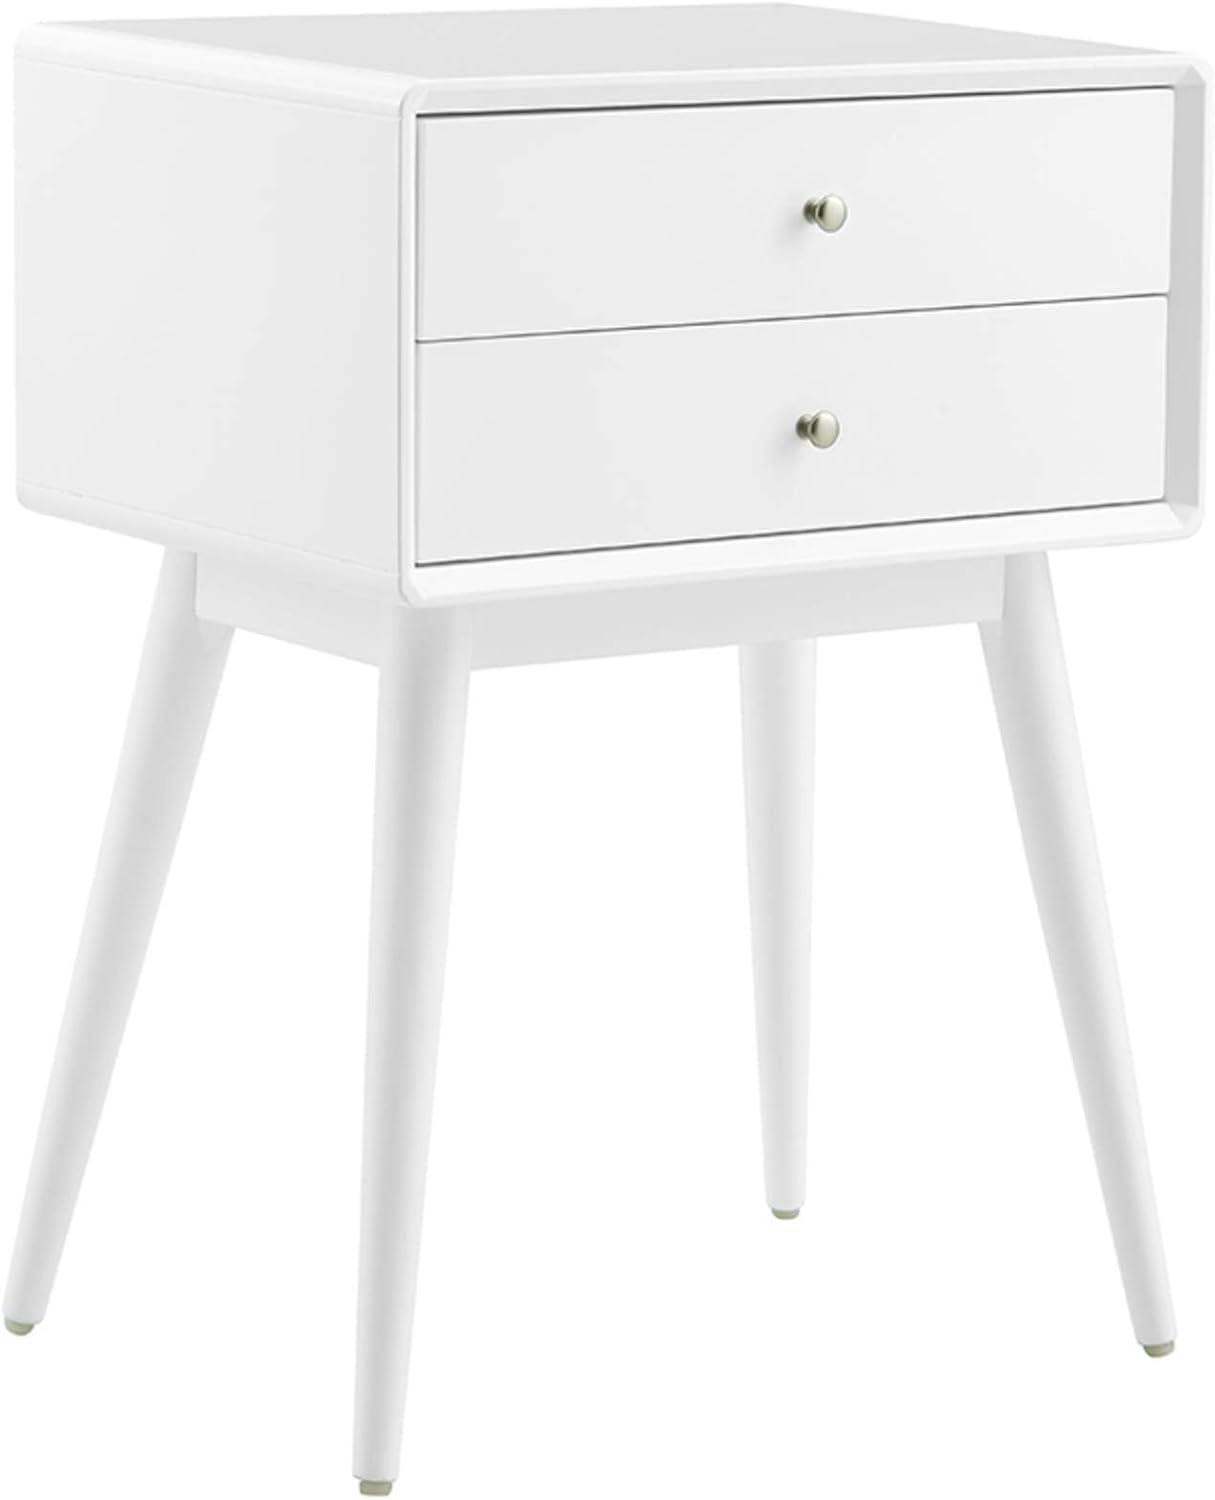 Mid-Century Modern White Wood and Metal Nightstand with Dual Drawers